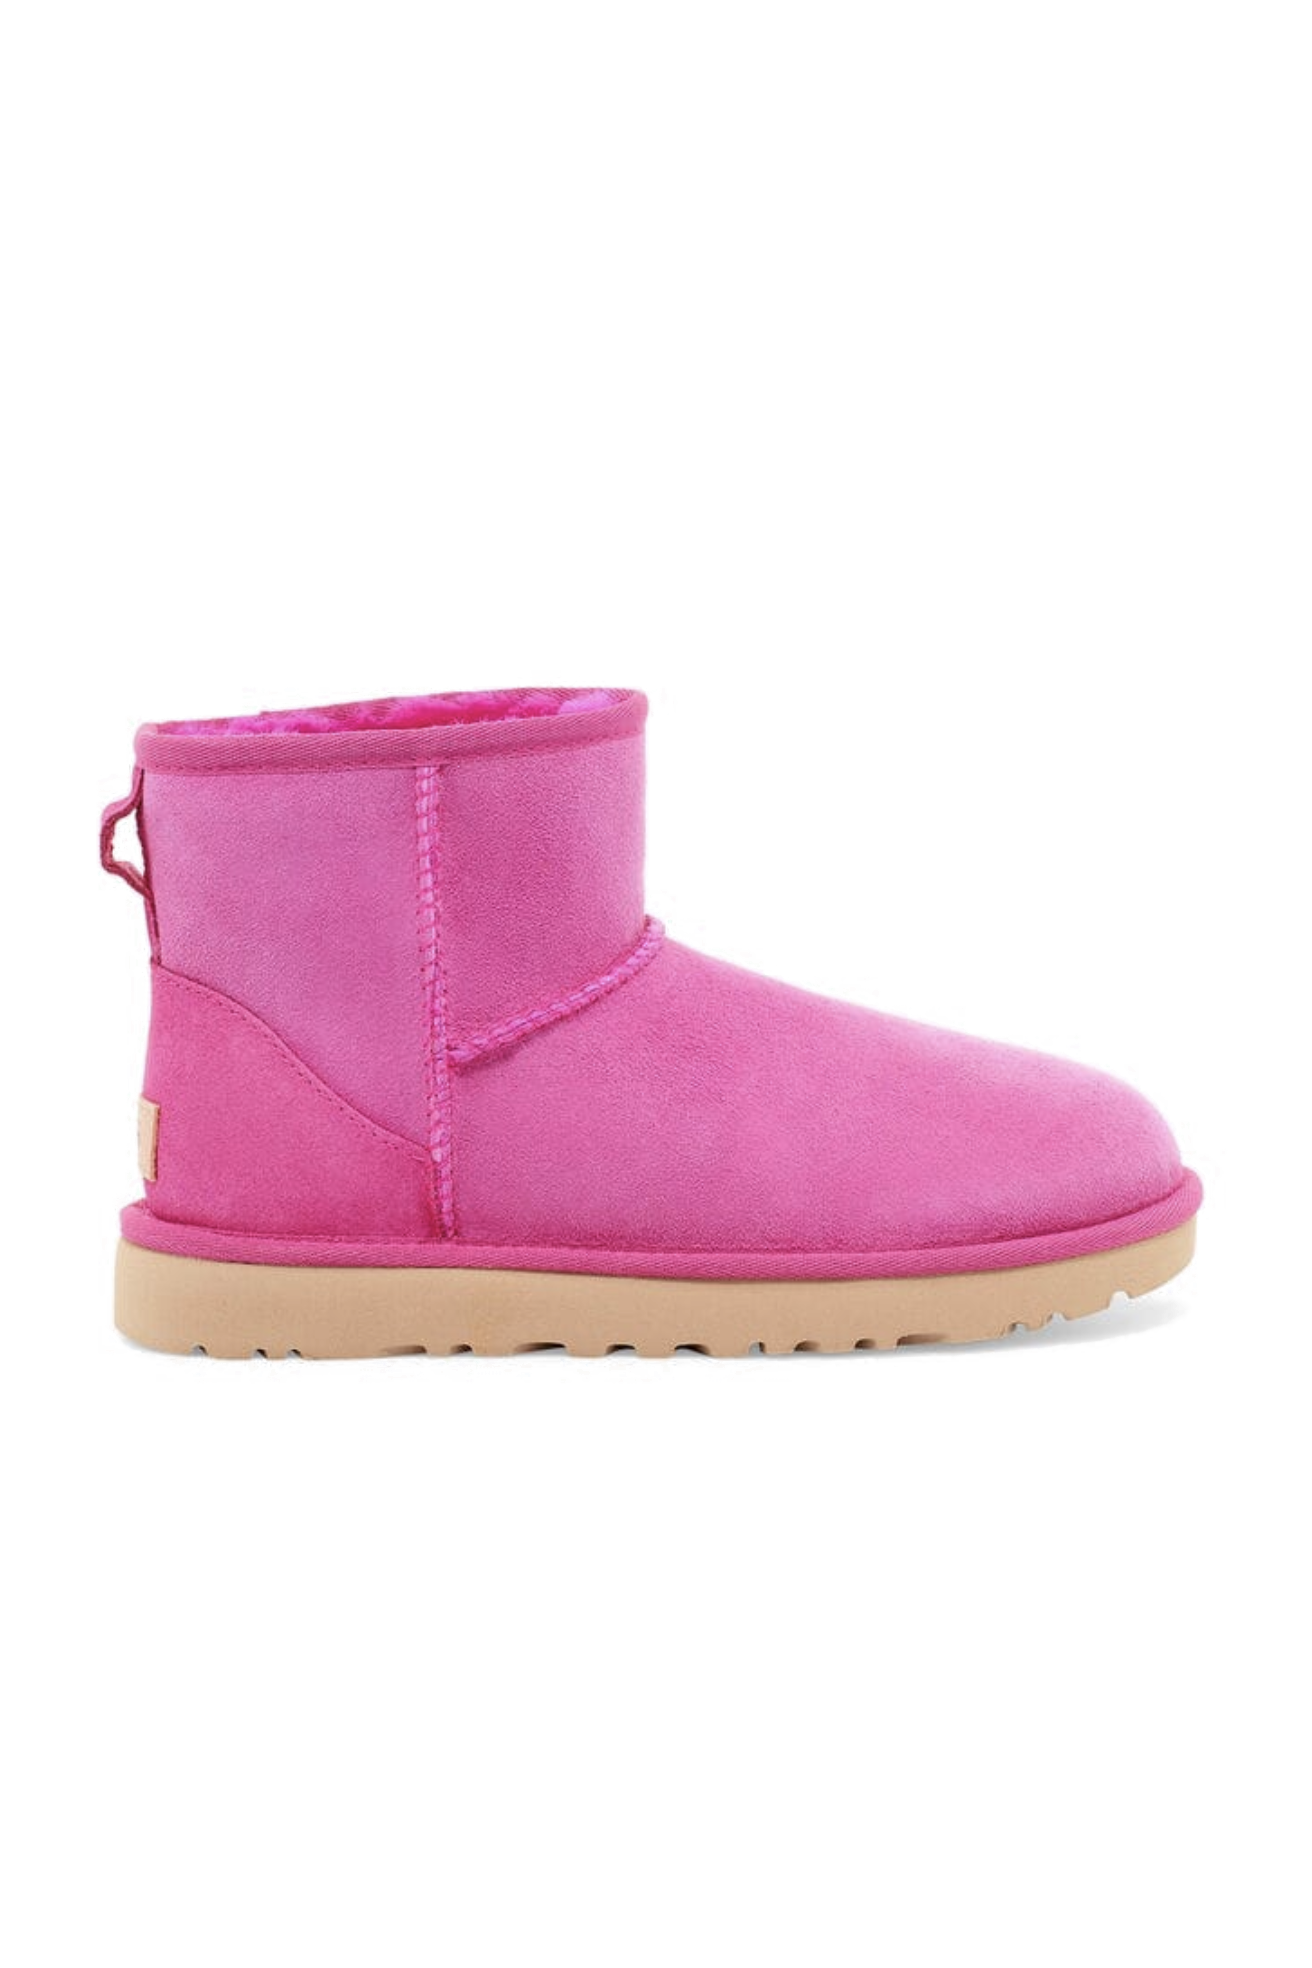 hot pink uggs